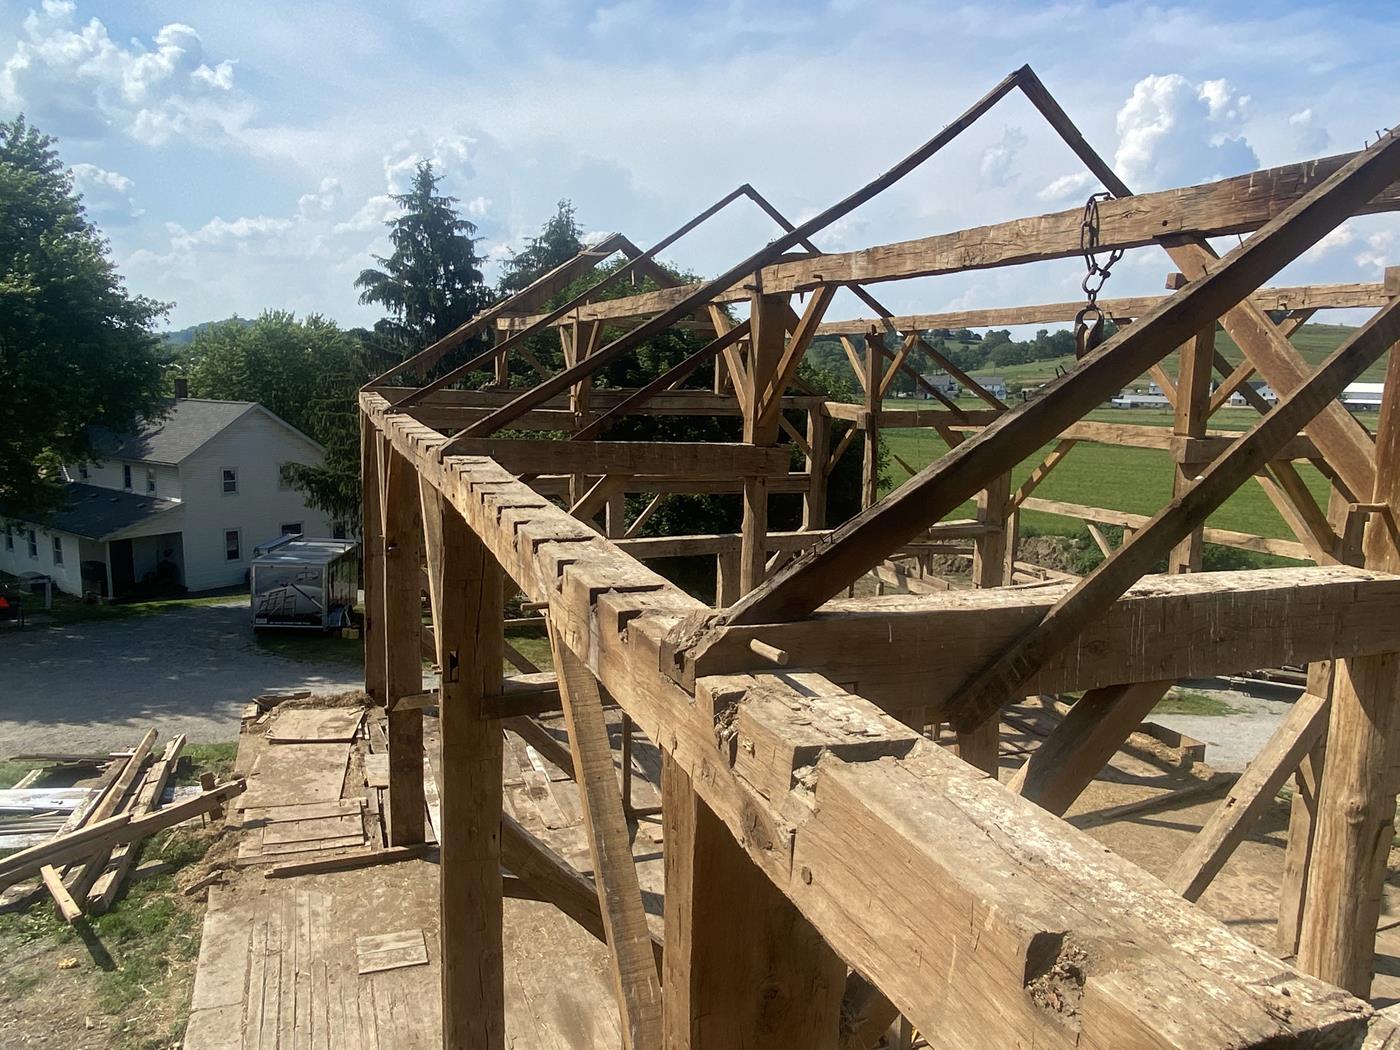 https://www.ohiovalleybarnsalvage.com/images/Beachy Historic Ohio Barn Frame - Your Source For Reclaimed Wall Cladding